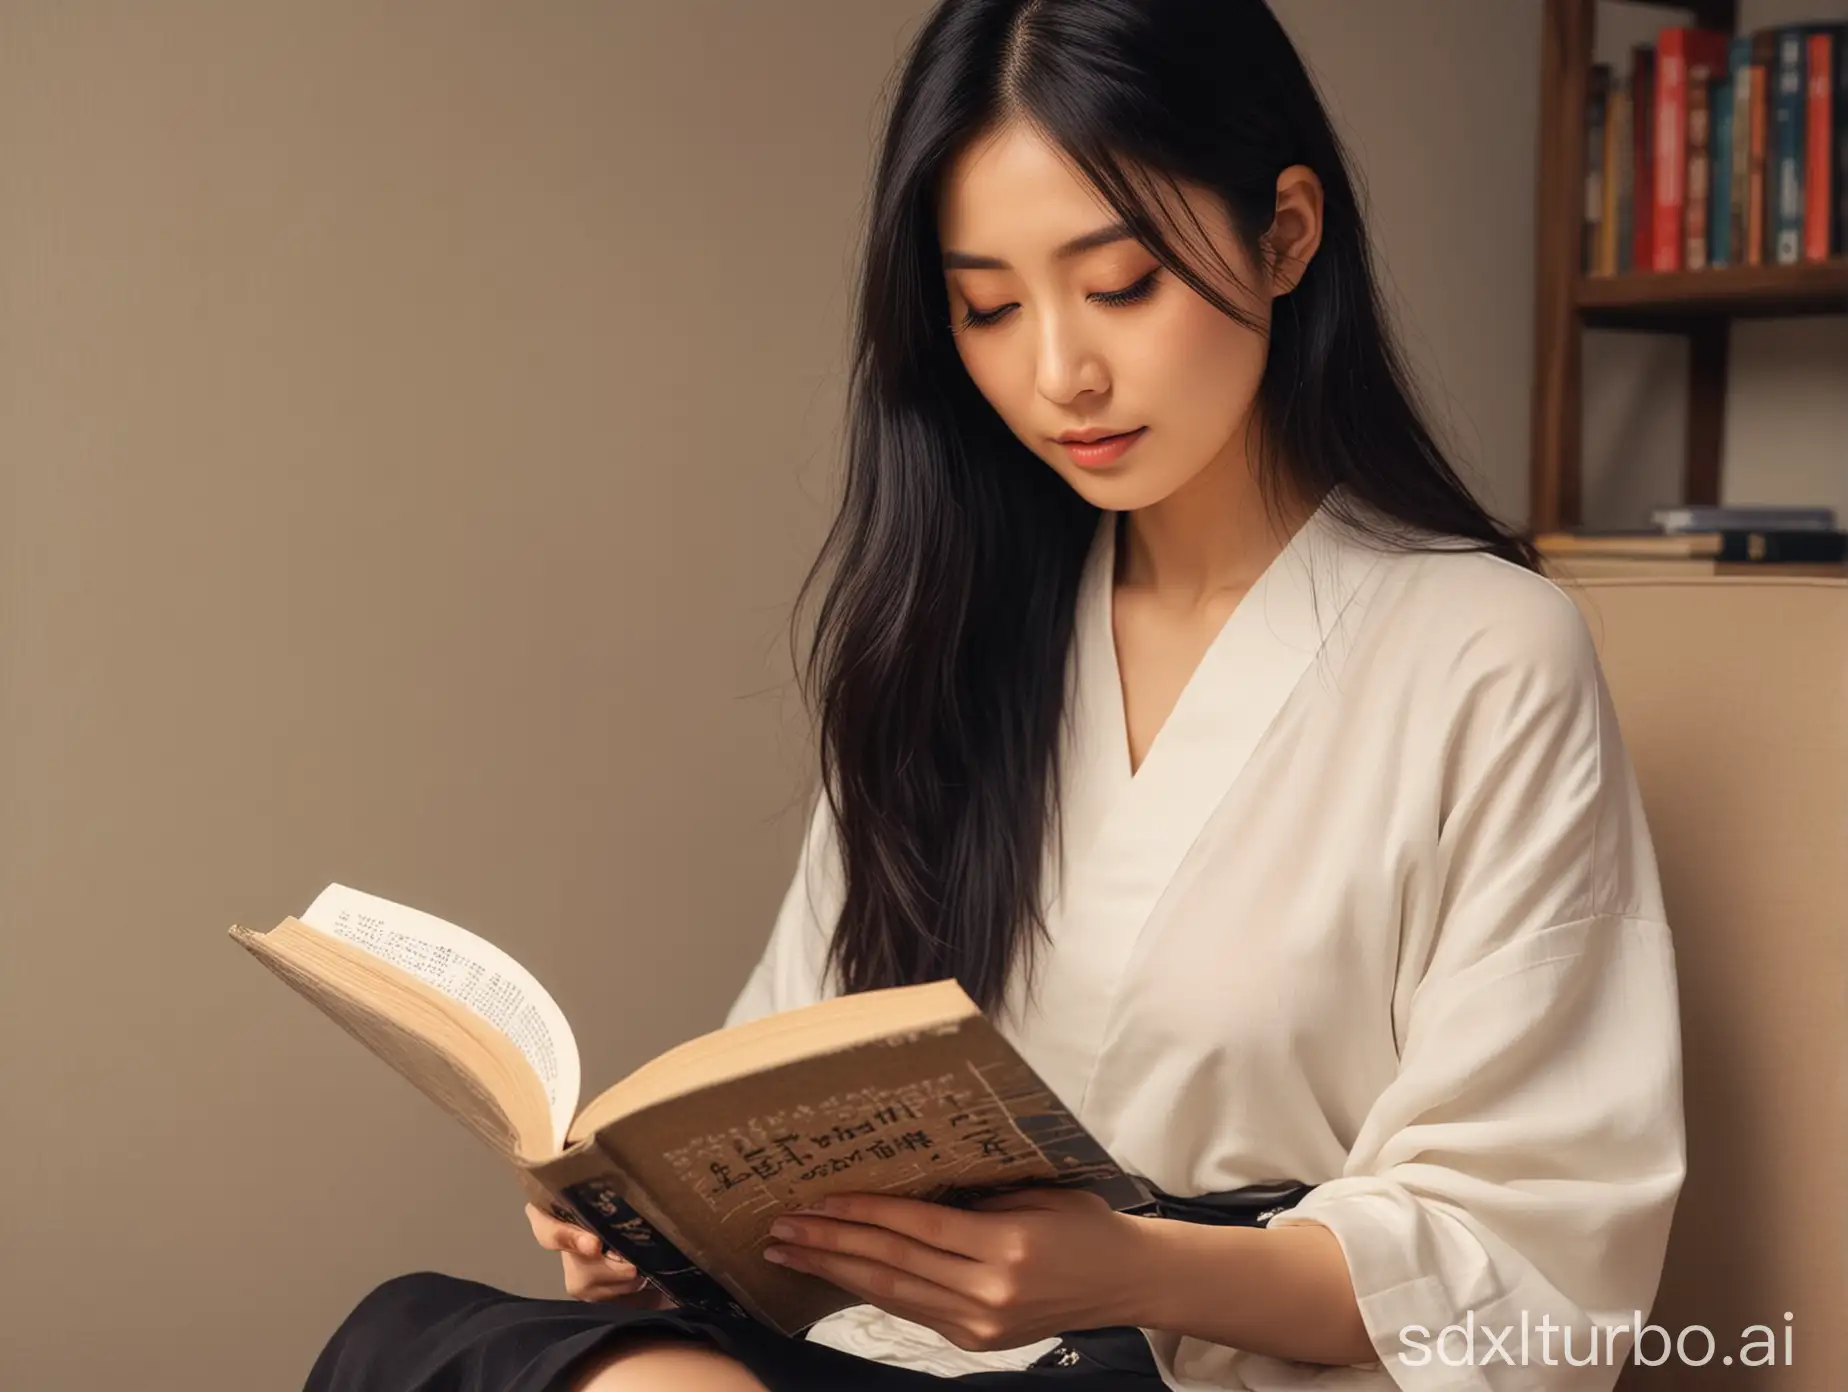 beautiful intellectual typical Japanese 33-year-old girl reads a book, Instagram model, long black hair, warm, black eyes, height 6.5 feets, female, masterpiece, 4k, correct fingers or hands